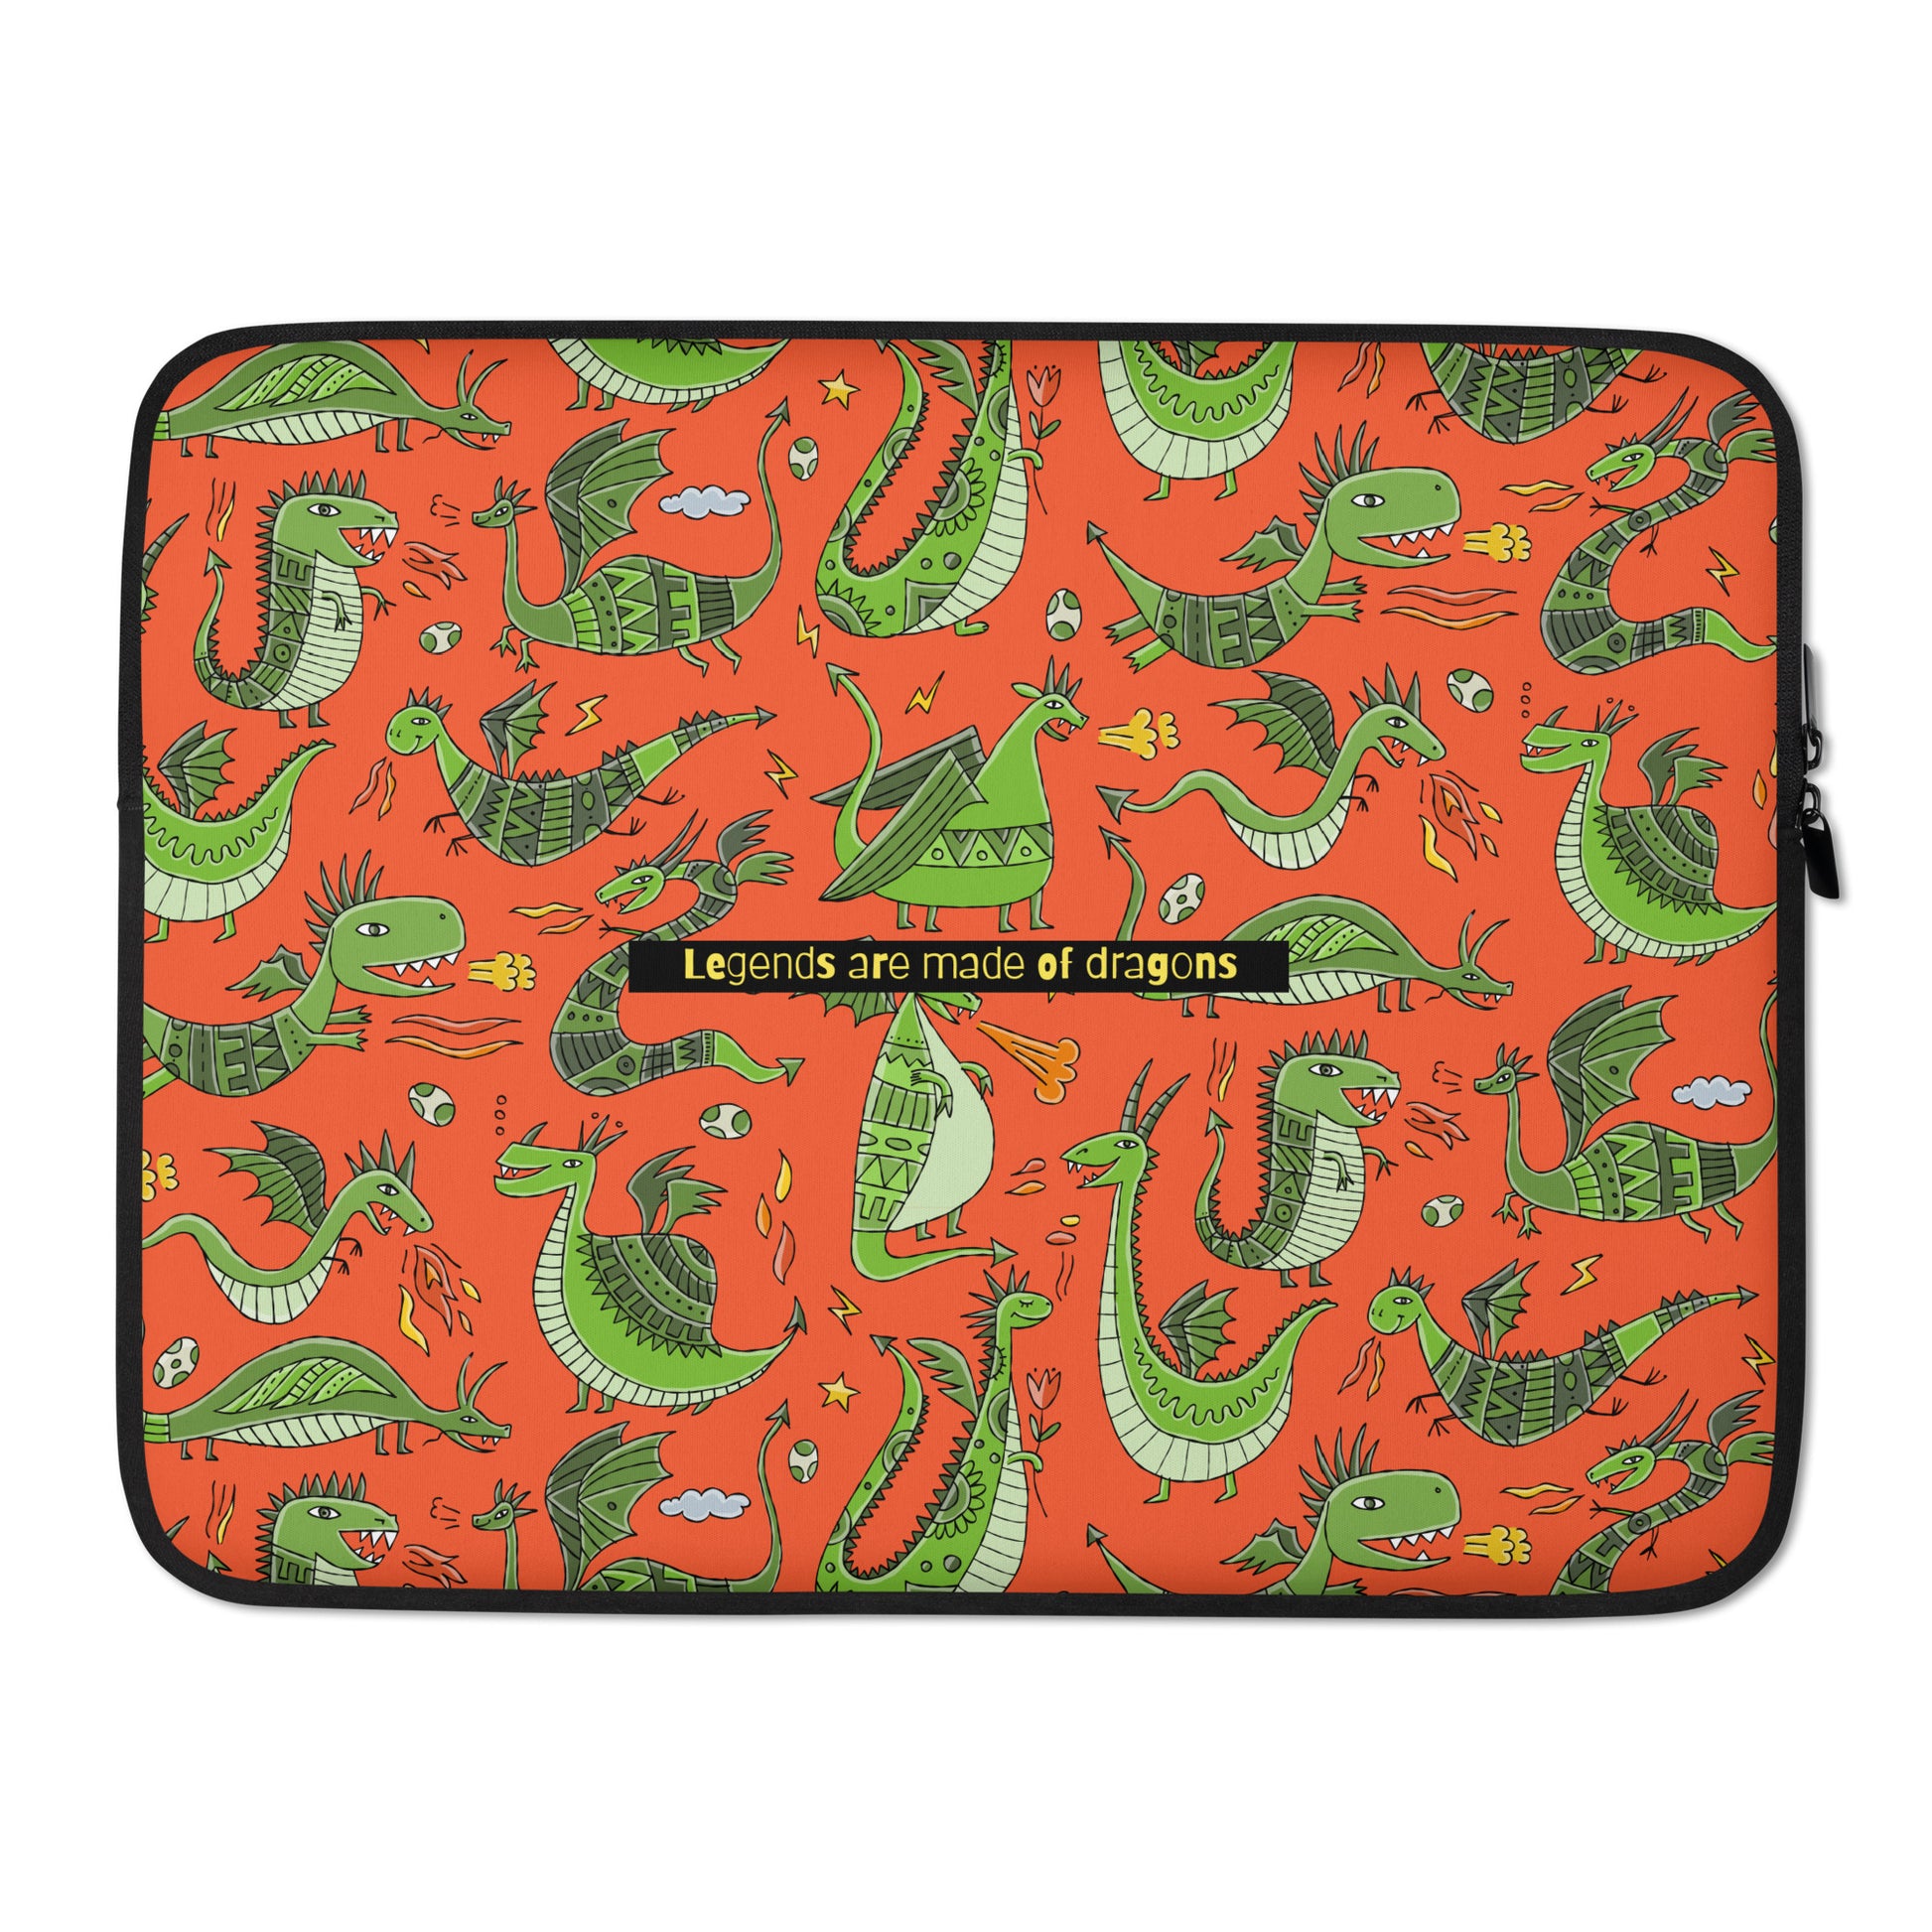 Personalised Laptop Sleeve / Custom Cover 15 with funny green Dragons on red background. Basic text (Legends are made of Dragons) can be changed or delete